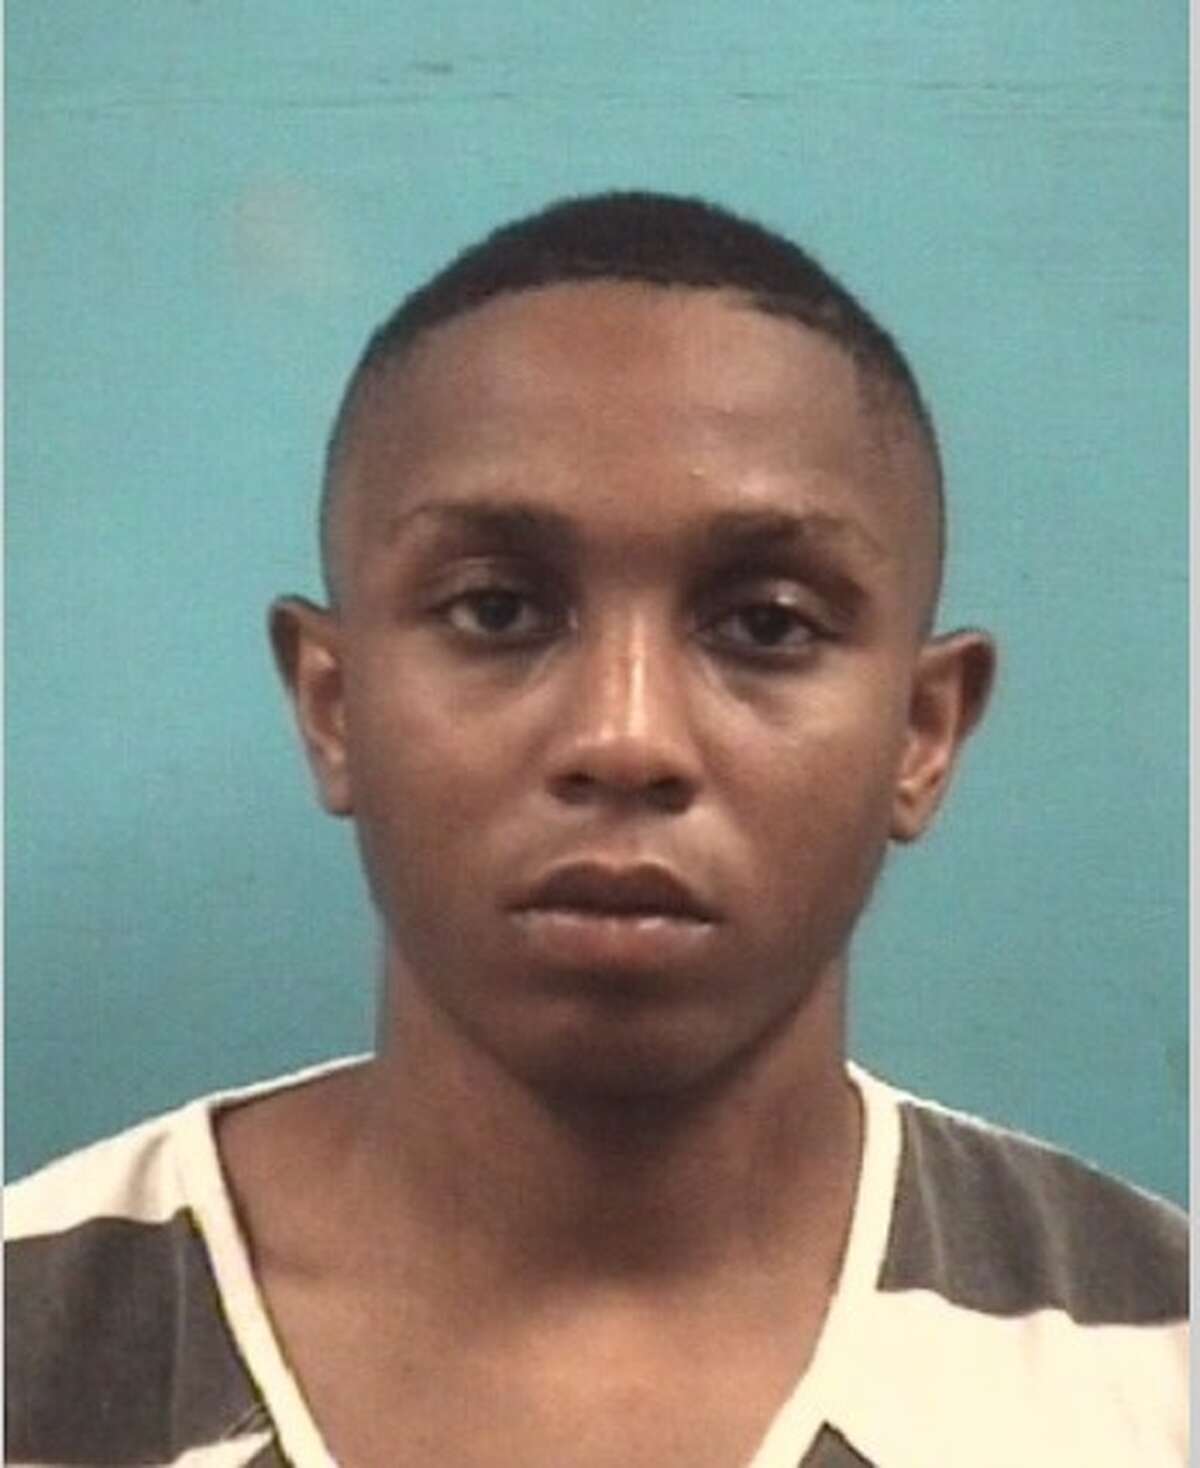 Daveion Tyricks Gray, 17, is charged with aggravated robbery. He is being held in the Pearland Municipal Jail with no bond.